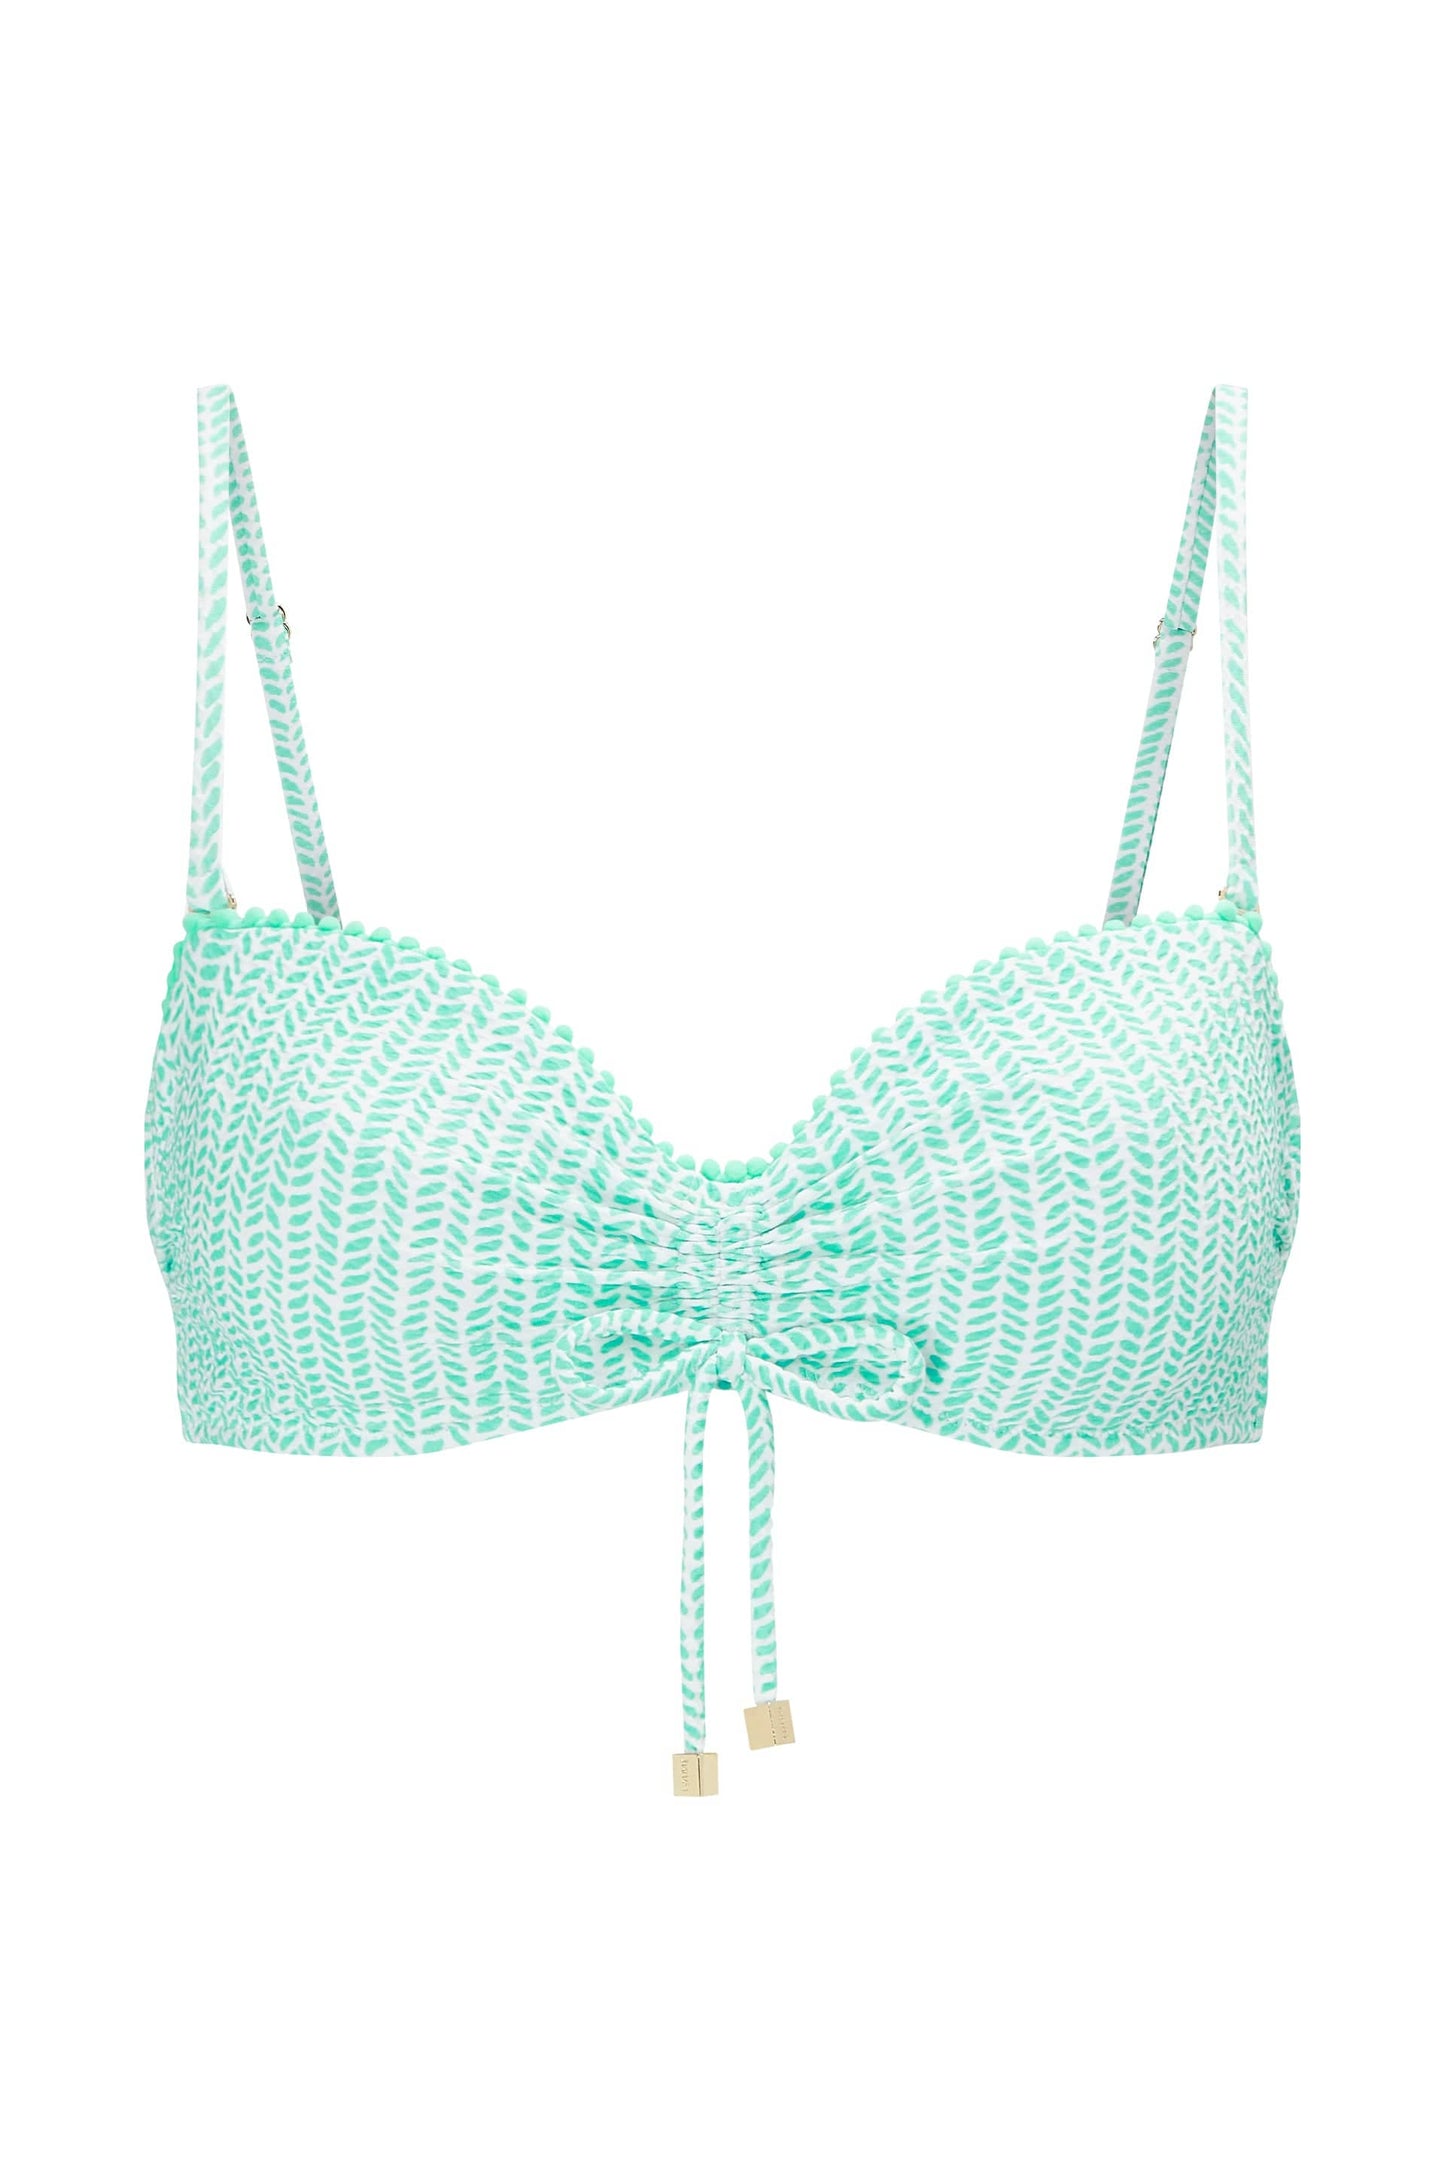 Seven Mile Beach Ruched Bandeau Top